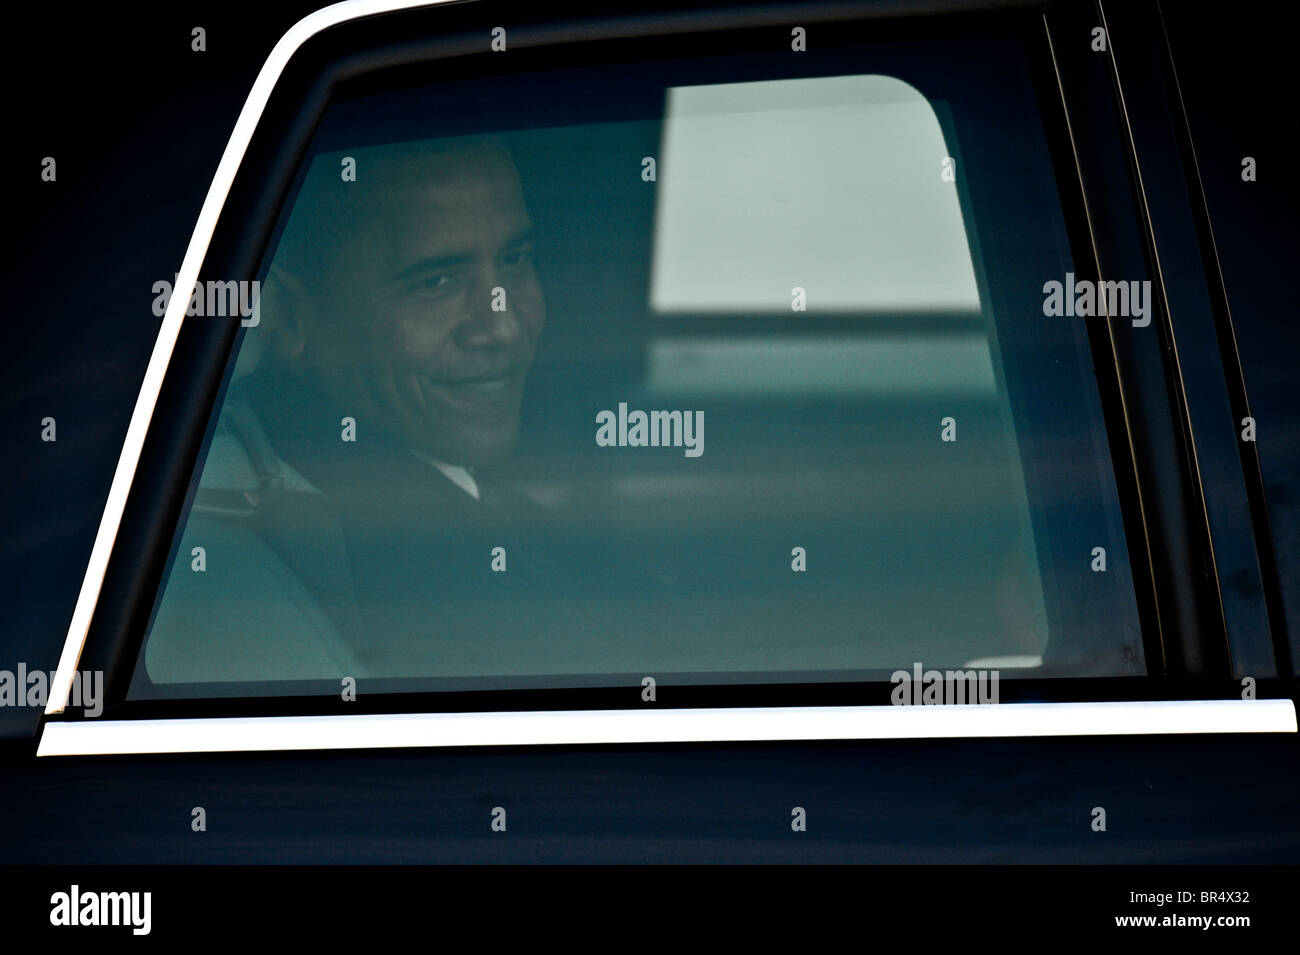 Obama rides in his limo during the Inaugural Parade in Washington Stock Photo